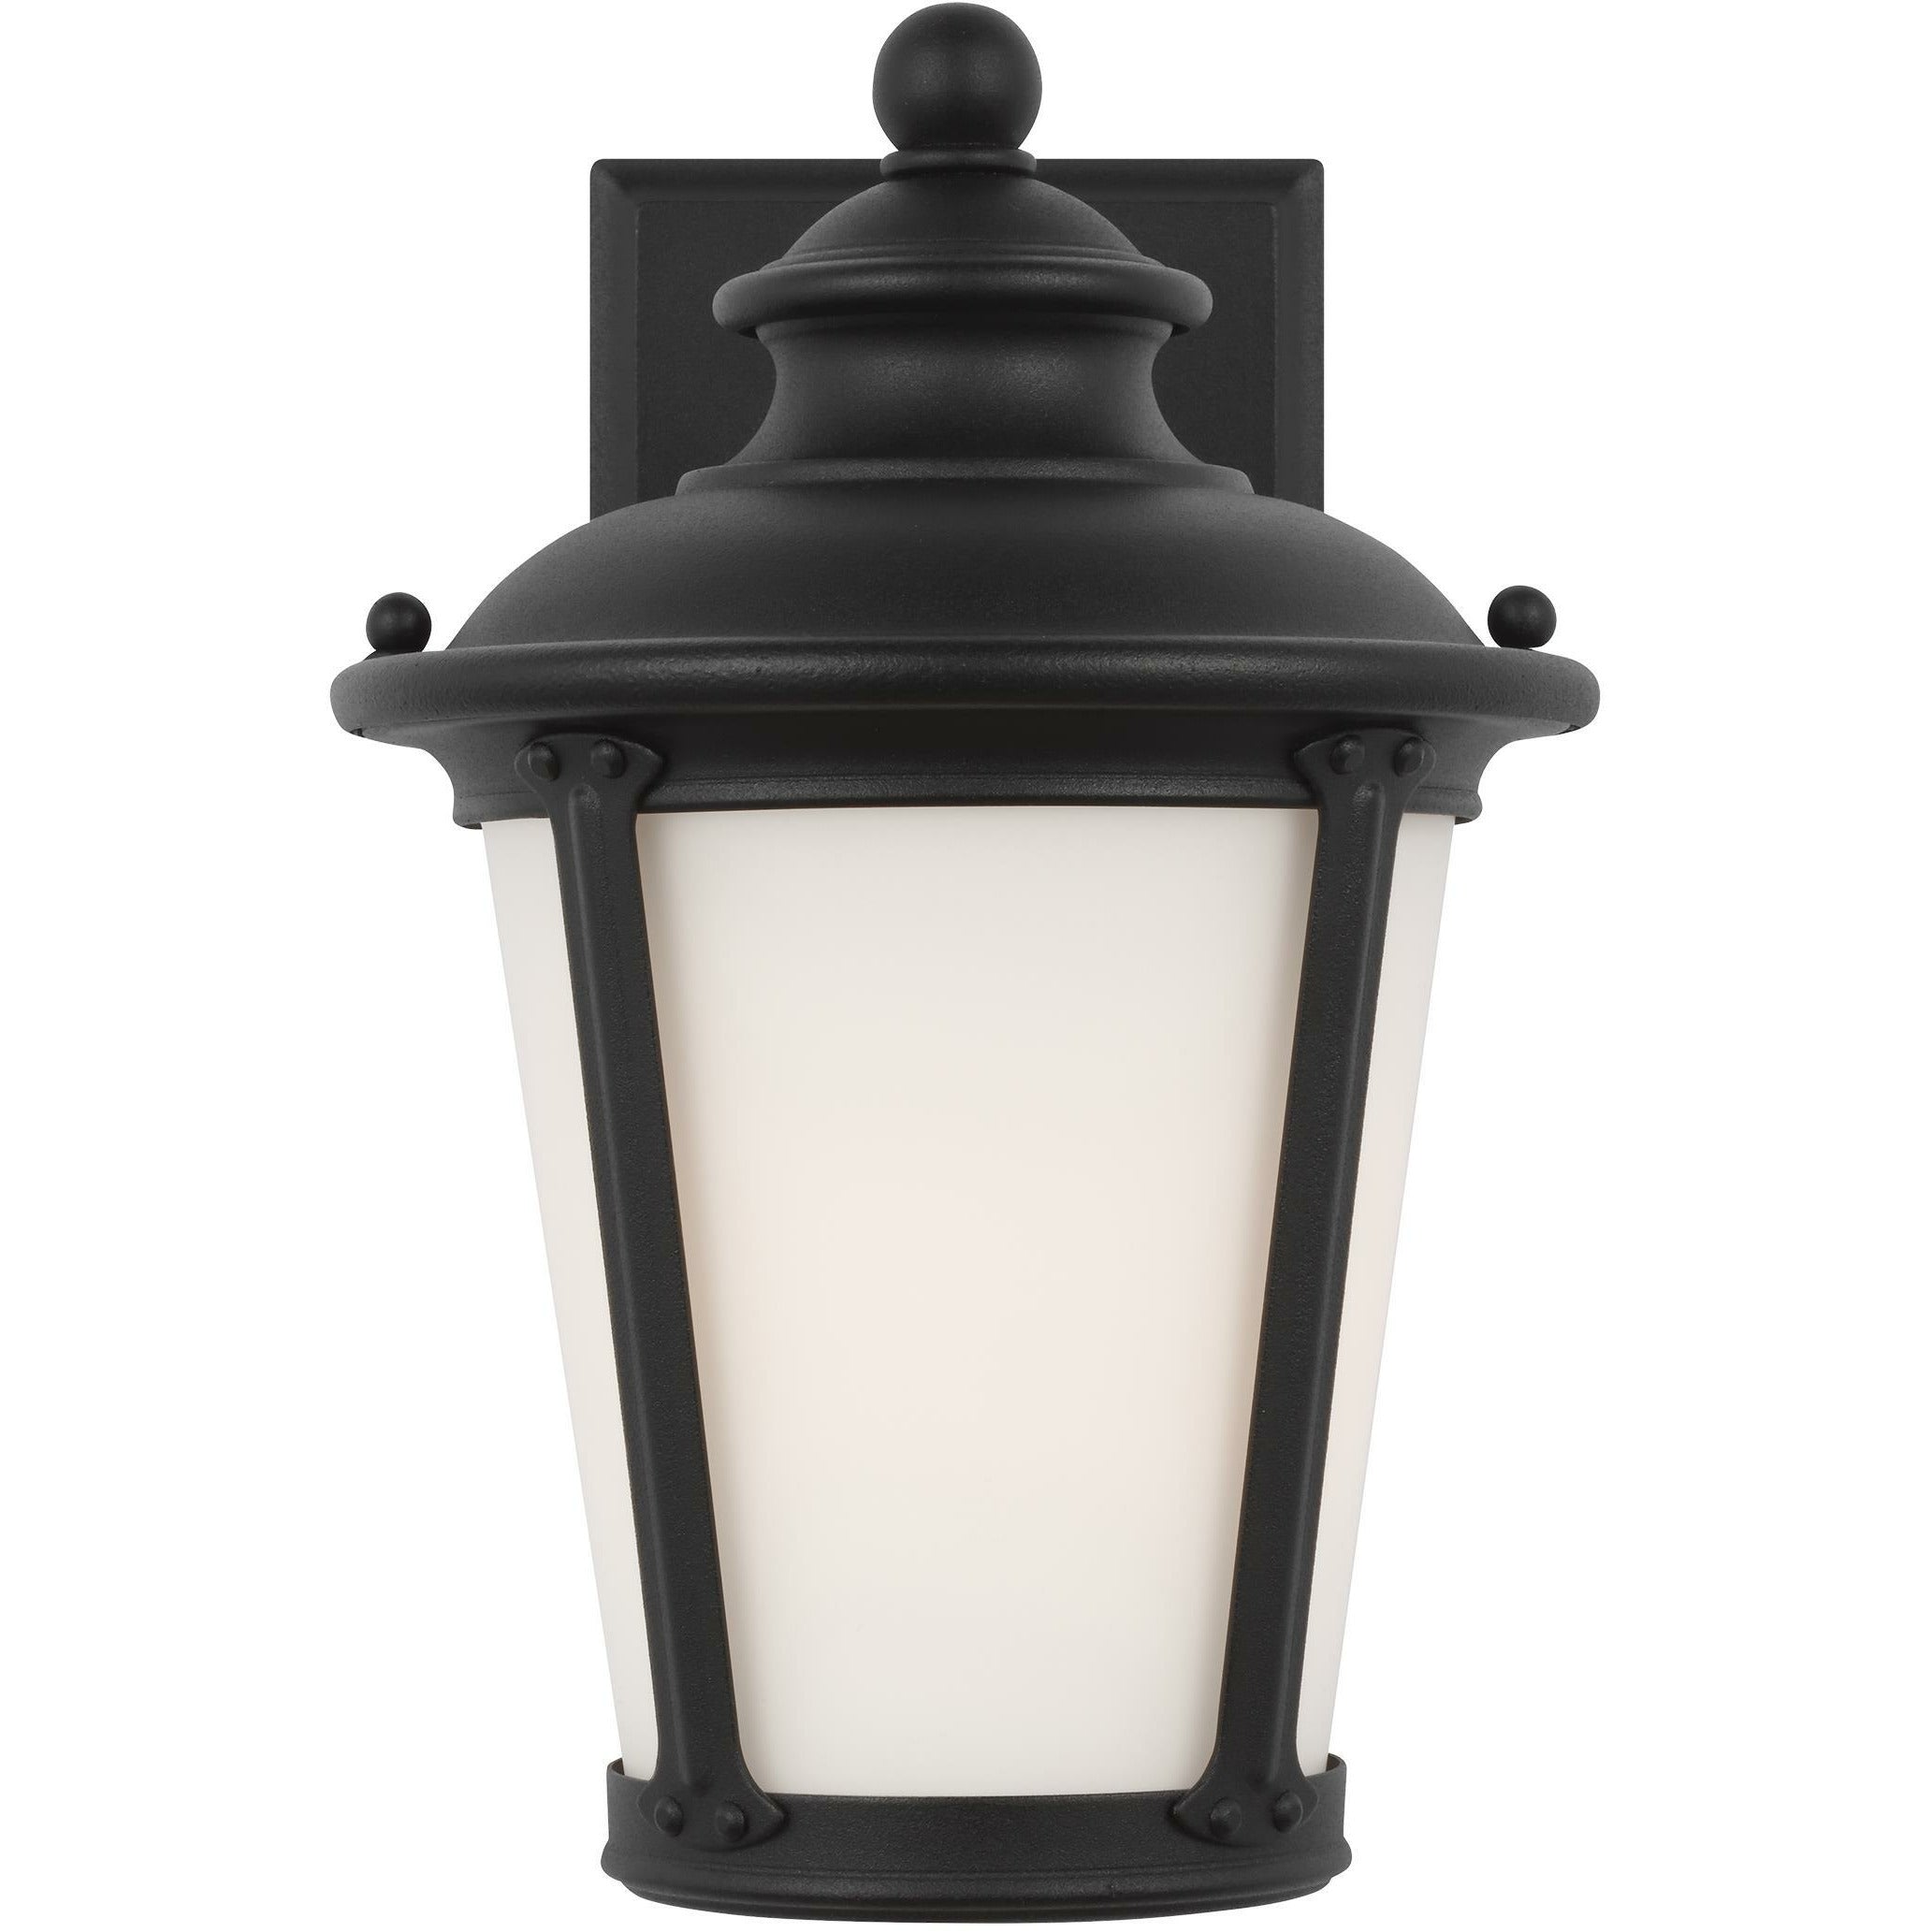 Cape May Outdoor Wall Light Black